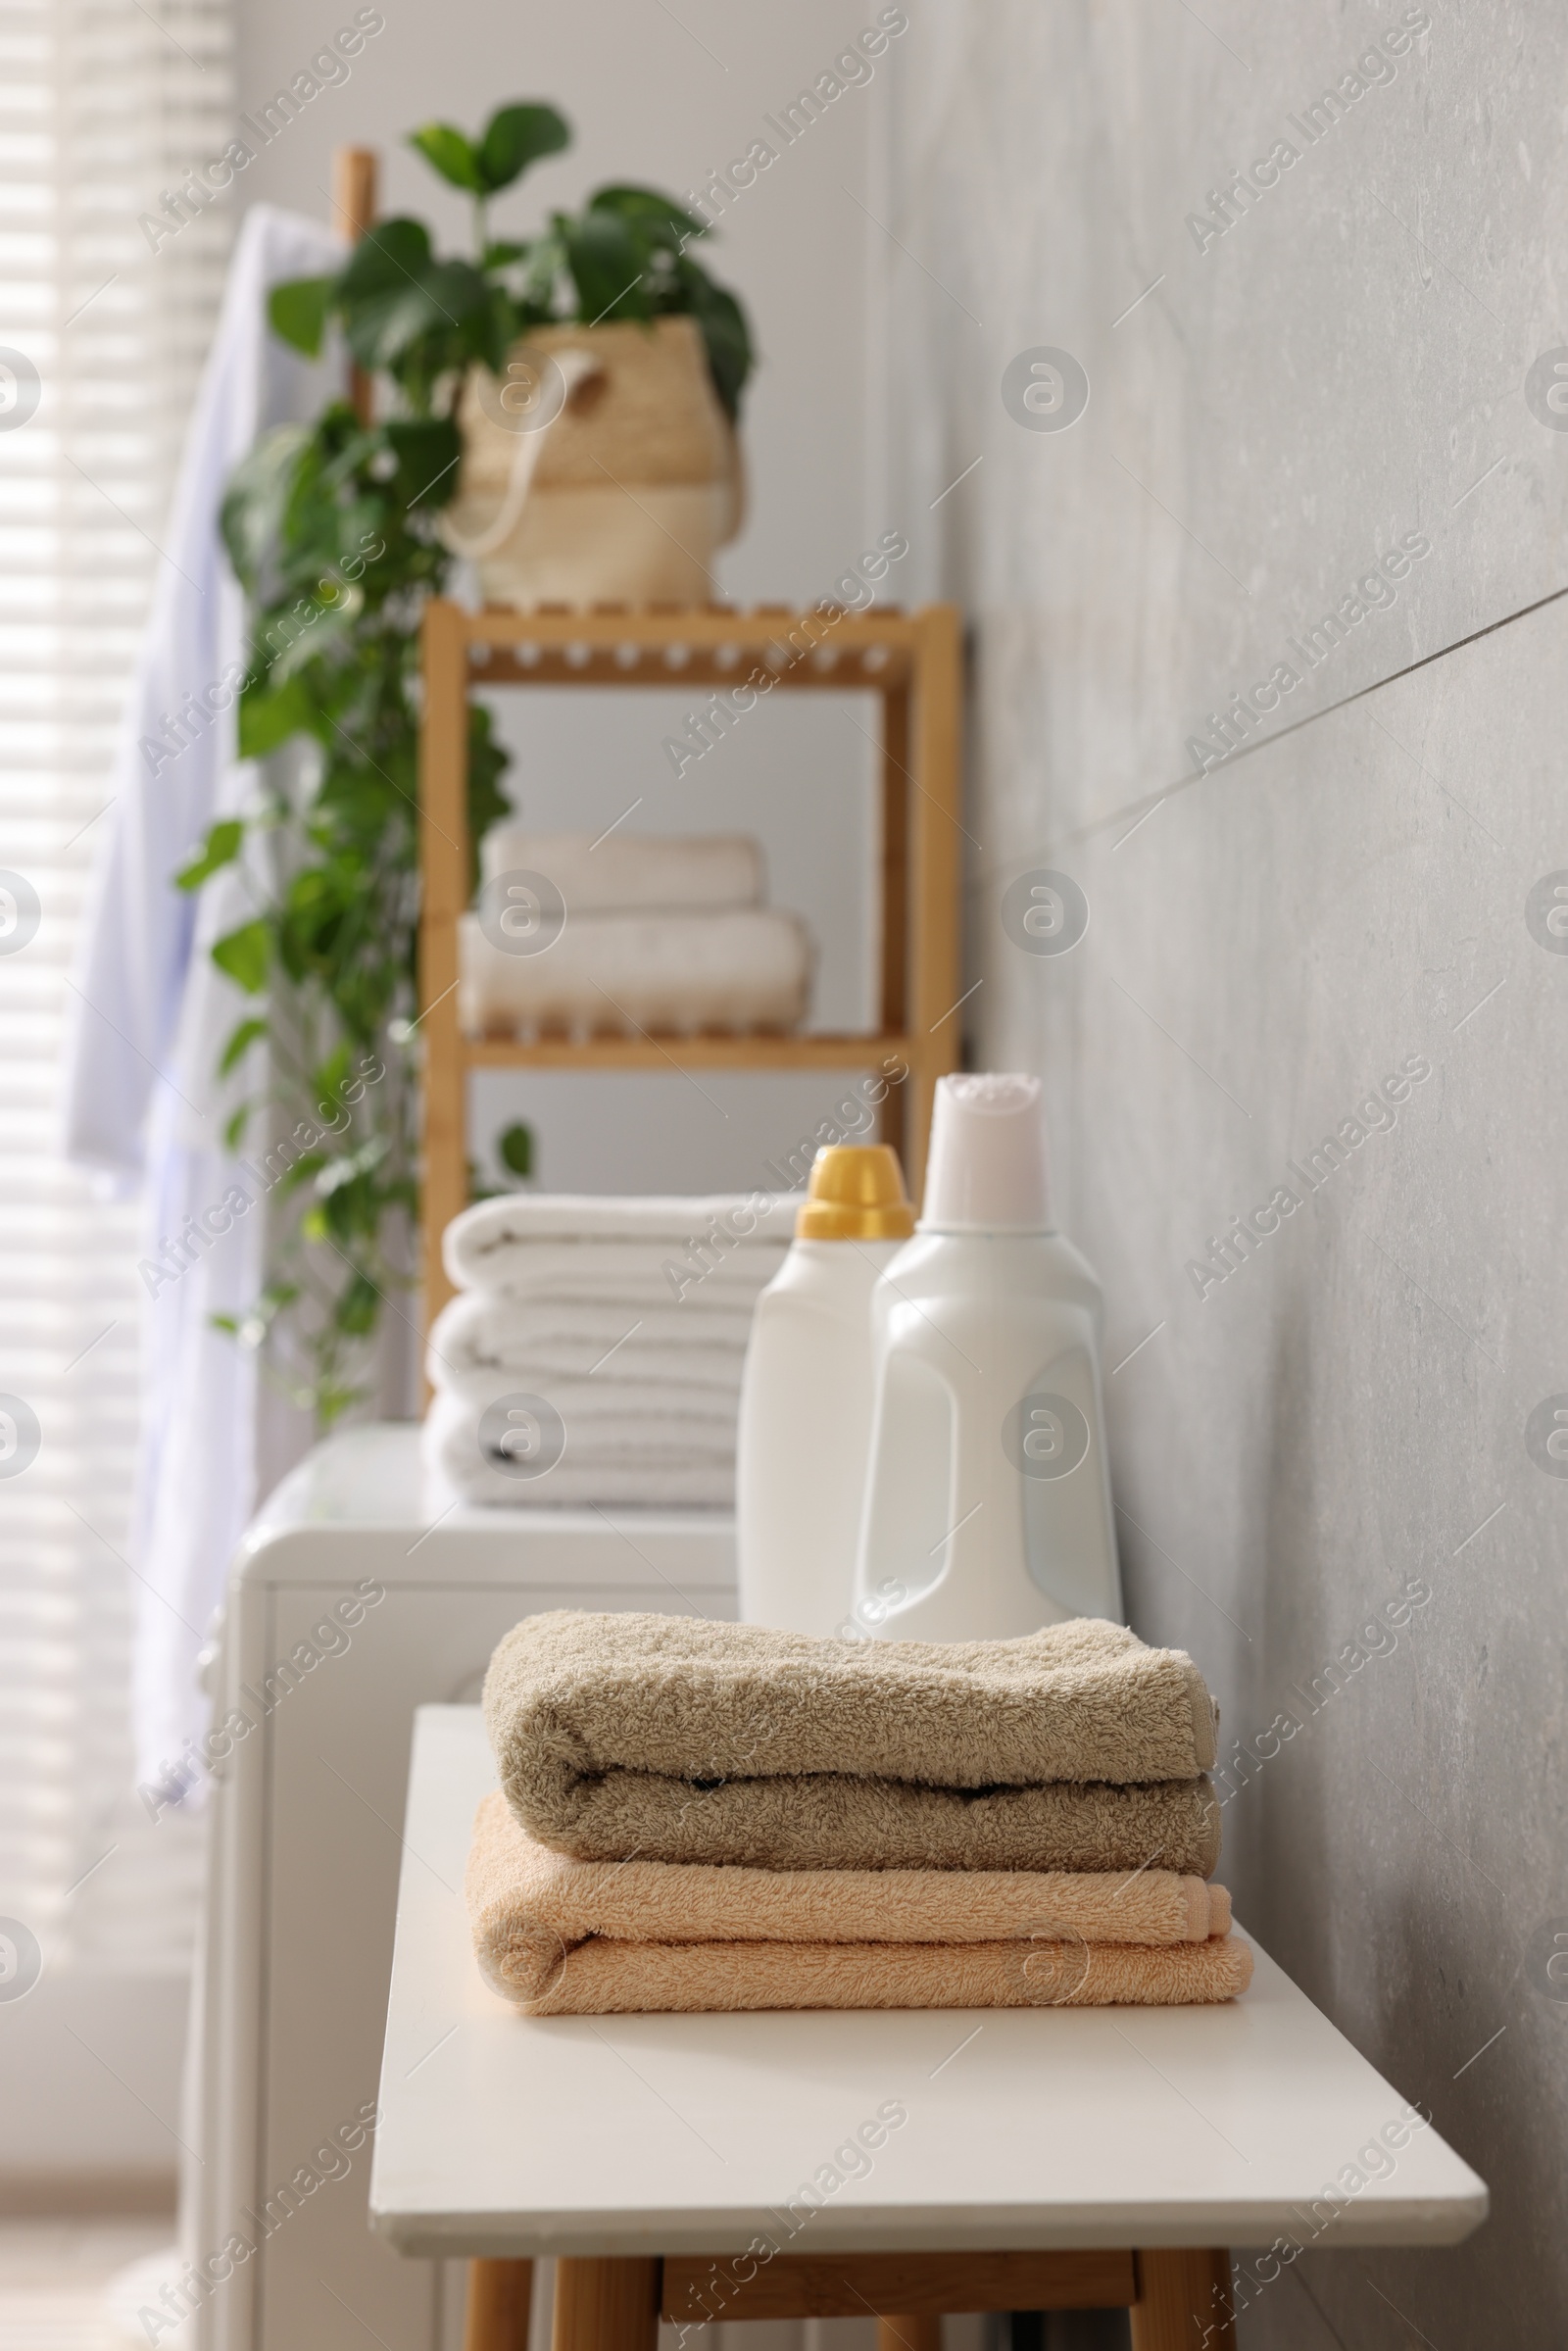 Photo of Soft towels, detergents and shelving unit indoors